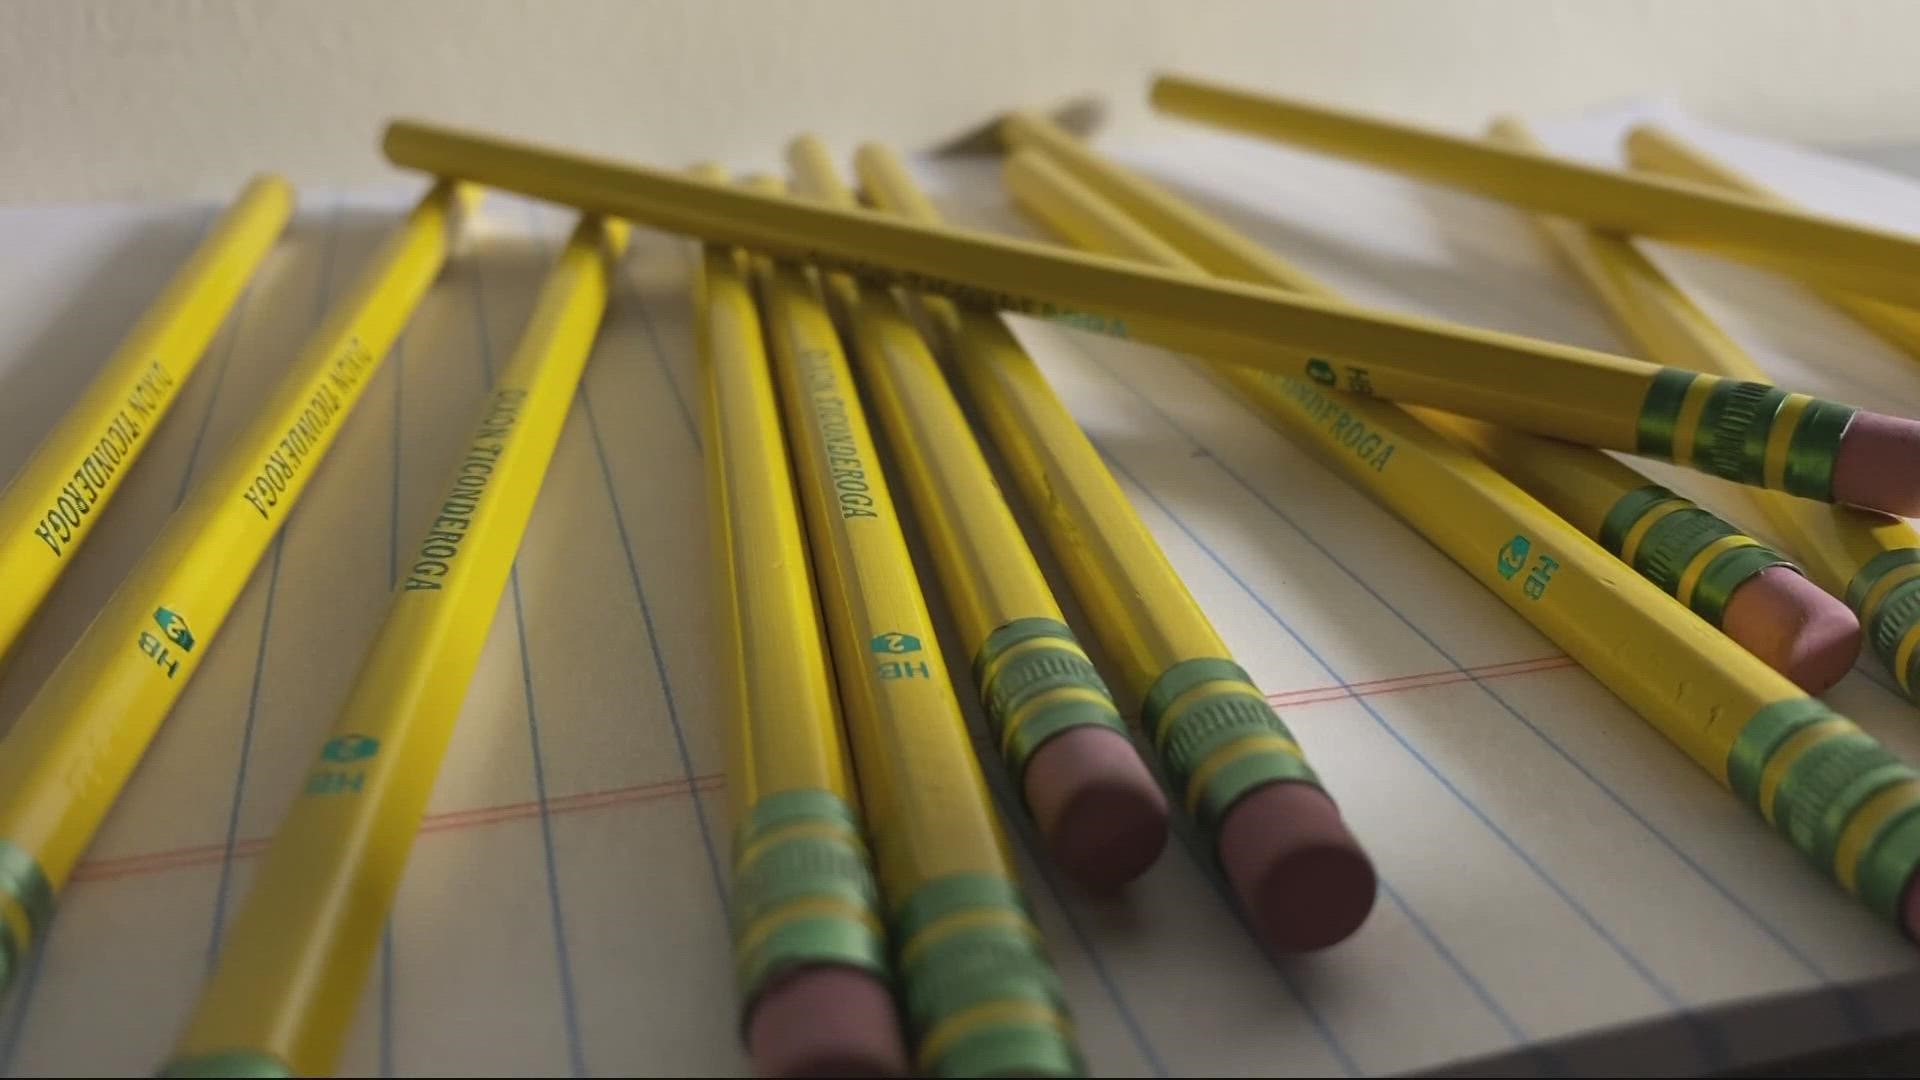 How the No. 2 pencil became the most preferred among schools